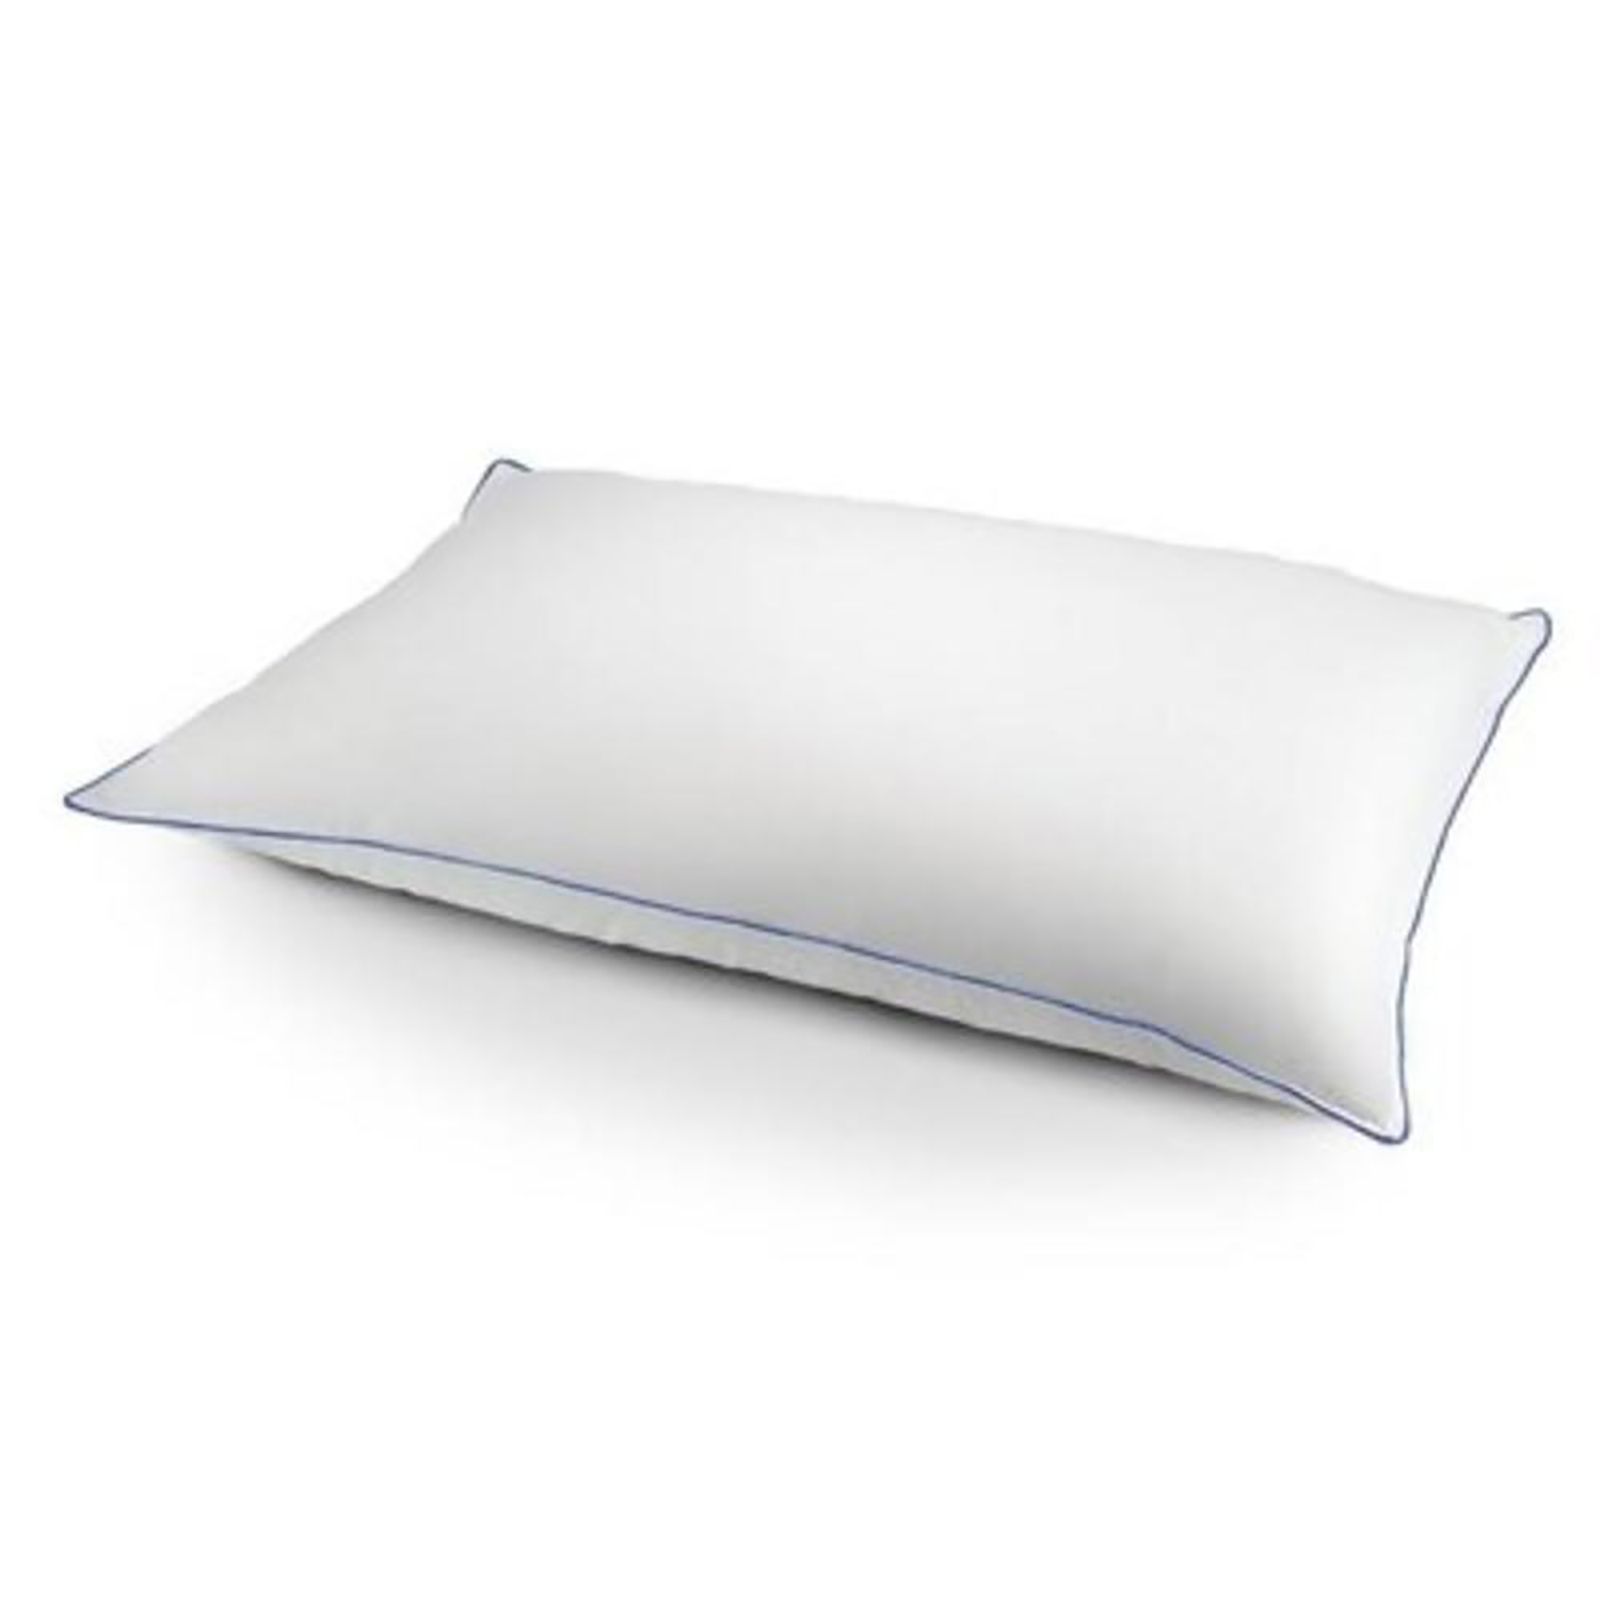 EFFORTLESS BEDDING Luxury Feather and Down Chamber Pillow - White